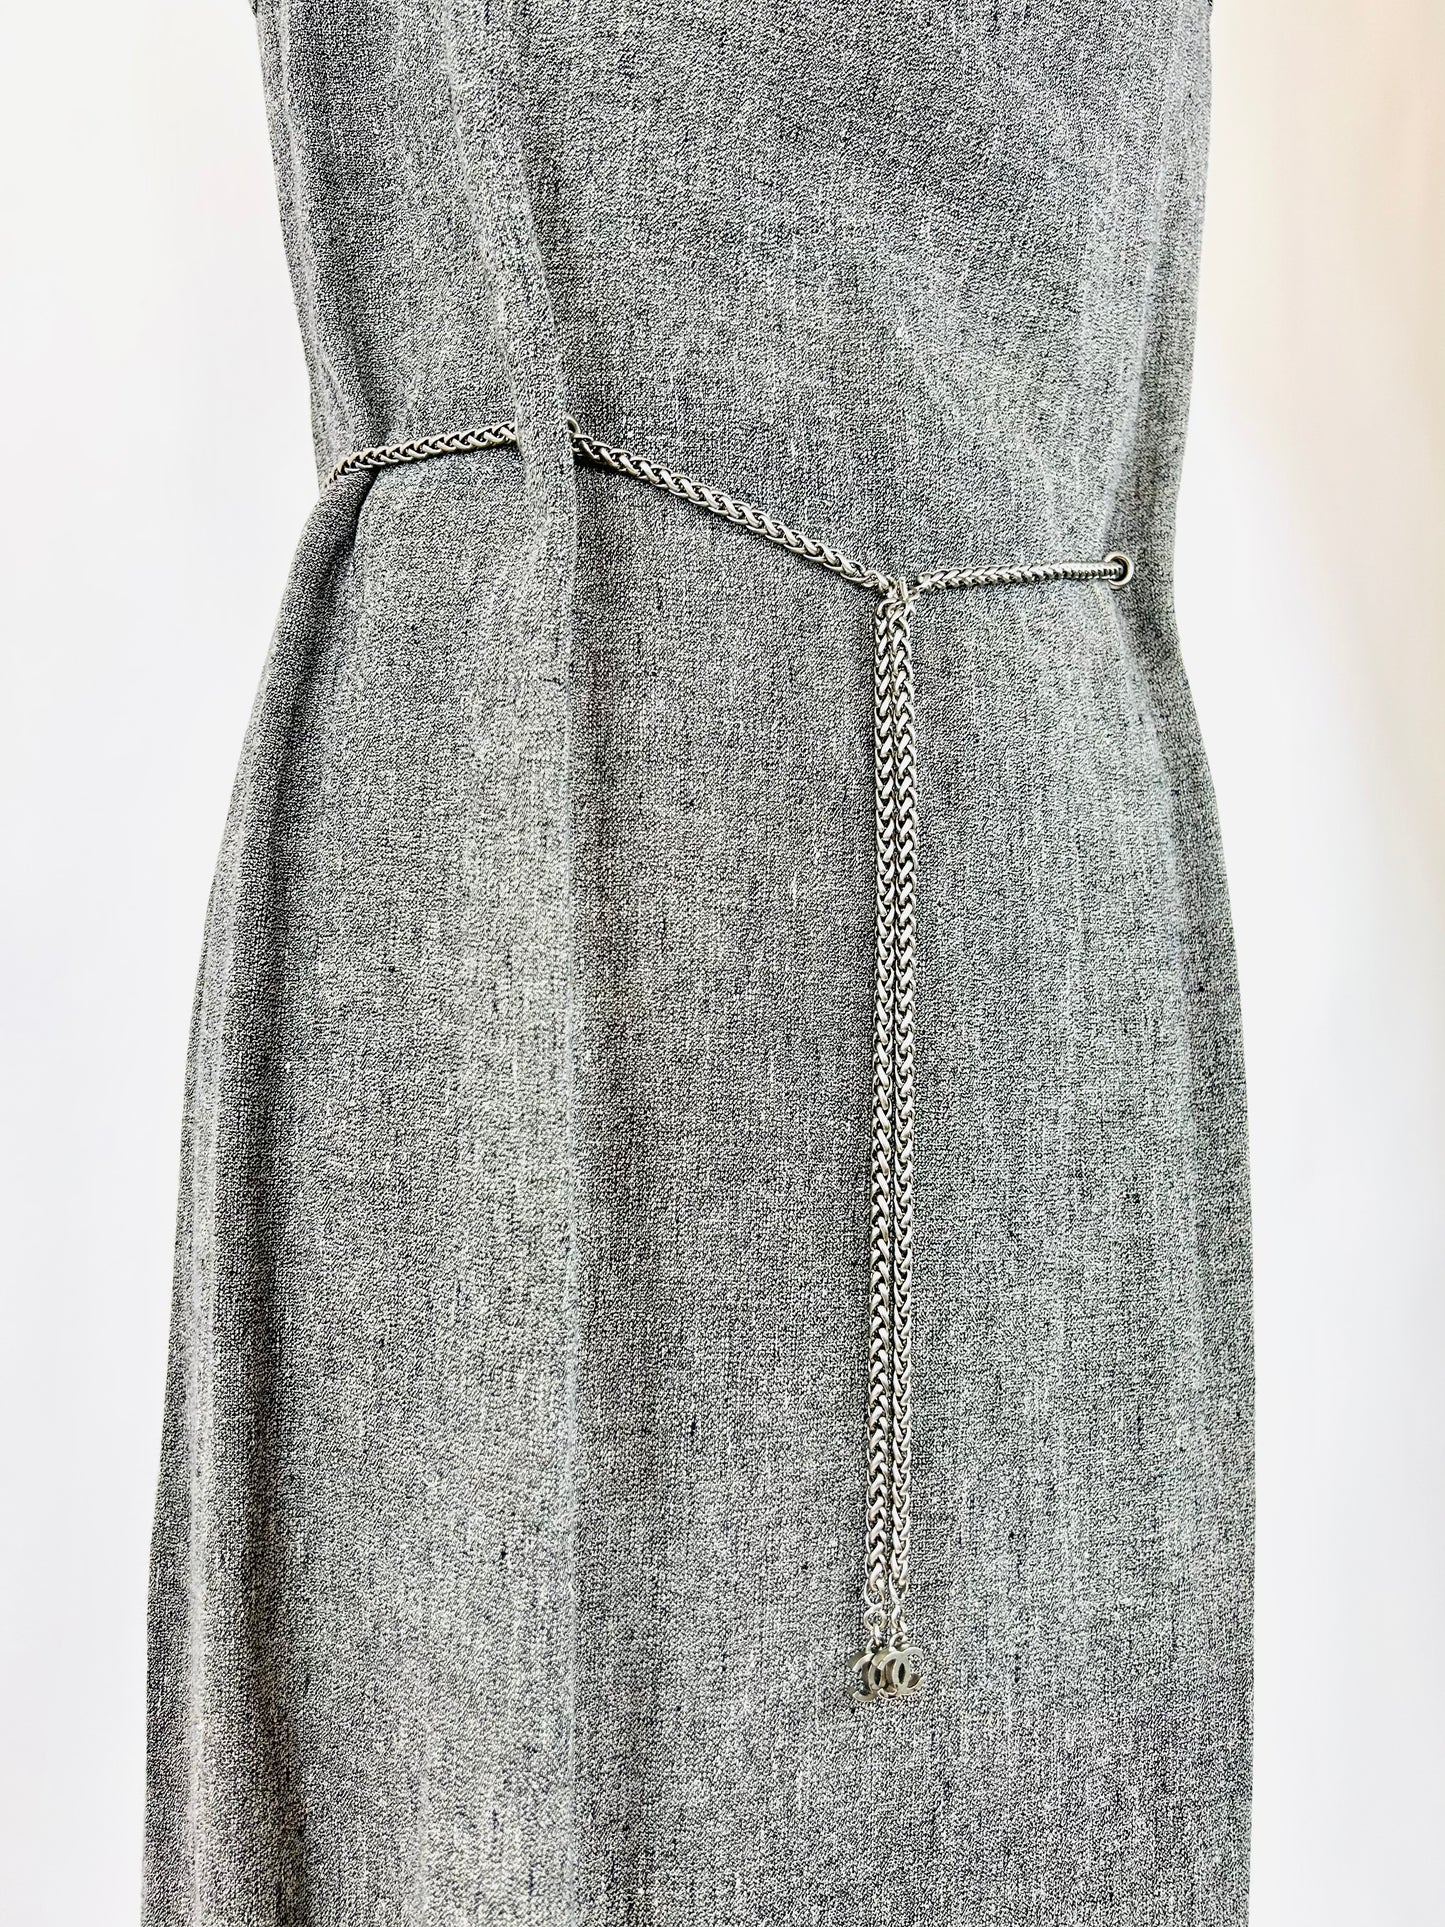 Chanel Grey Dress with Chain Belt